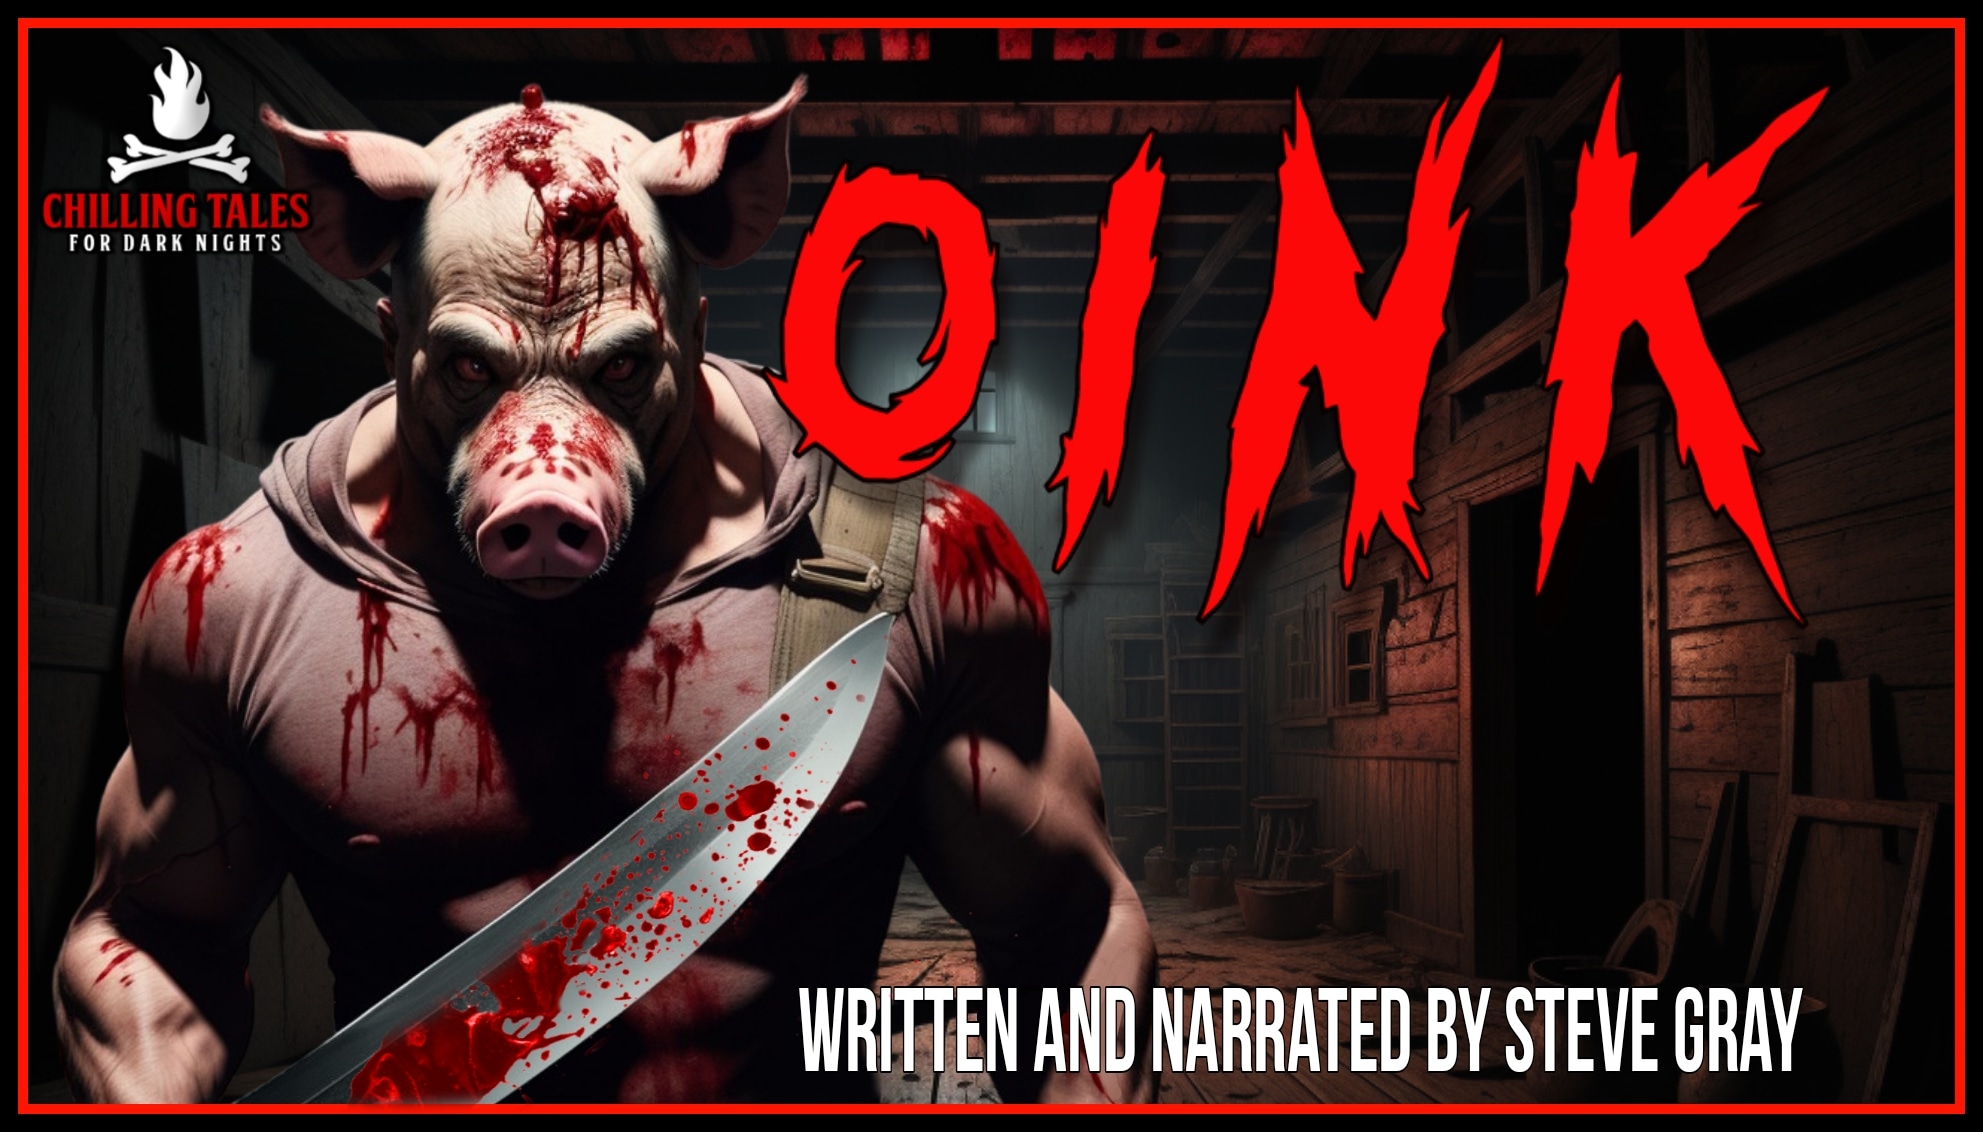 Horror Audio Story “OINK” Premieres May 27th on Chilling Tales